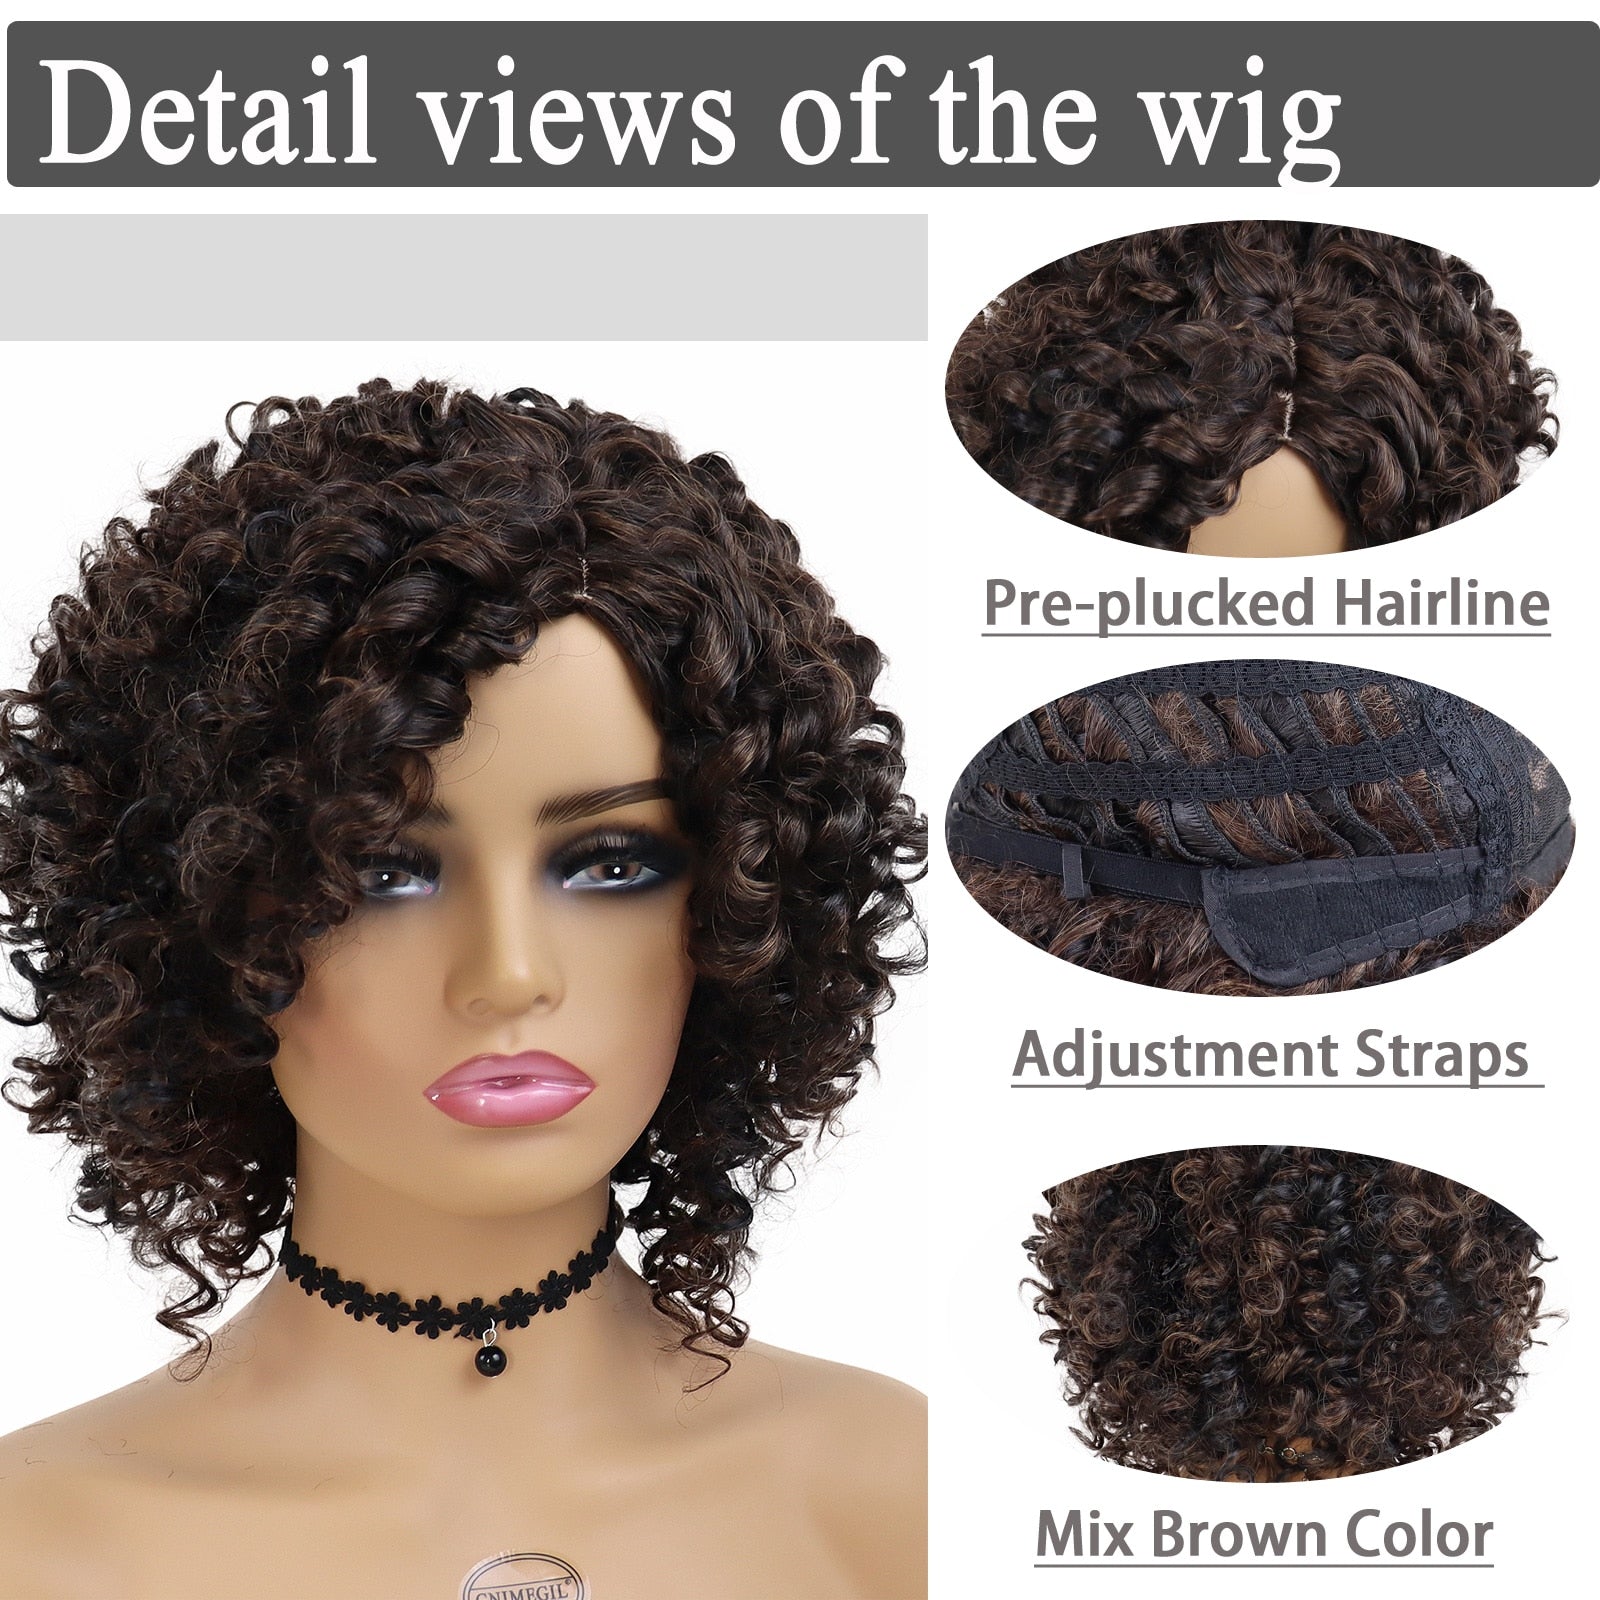 GNIMEGIL Synthetic Curly Wigs Short Bob Natural Afro Mix Brown Hair